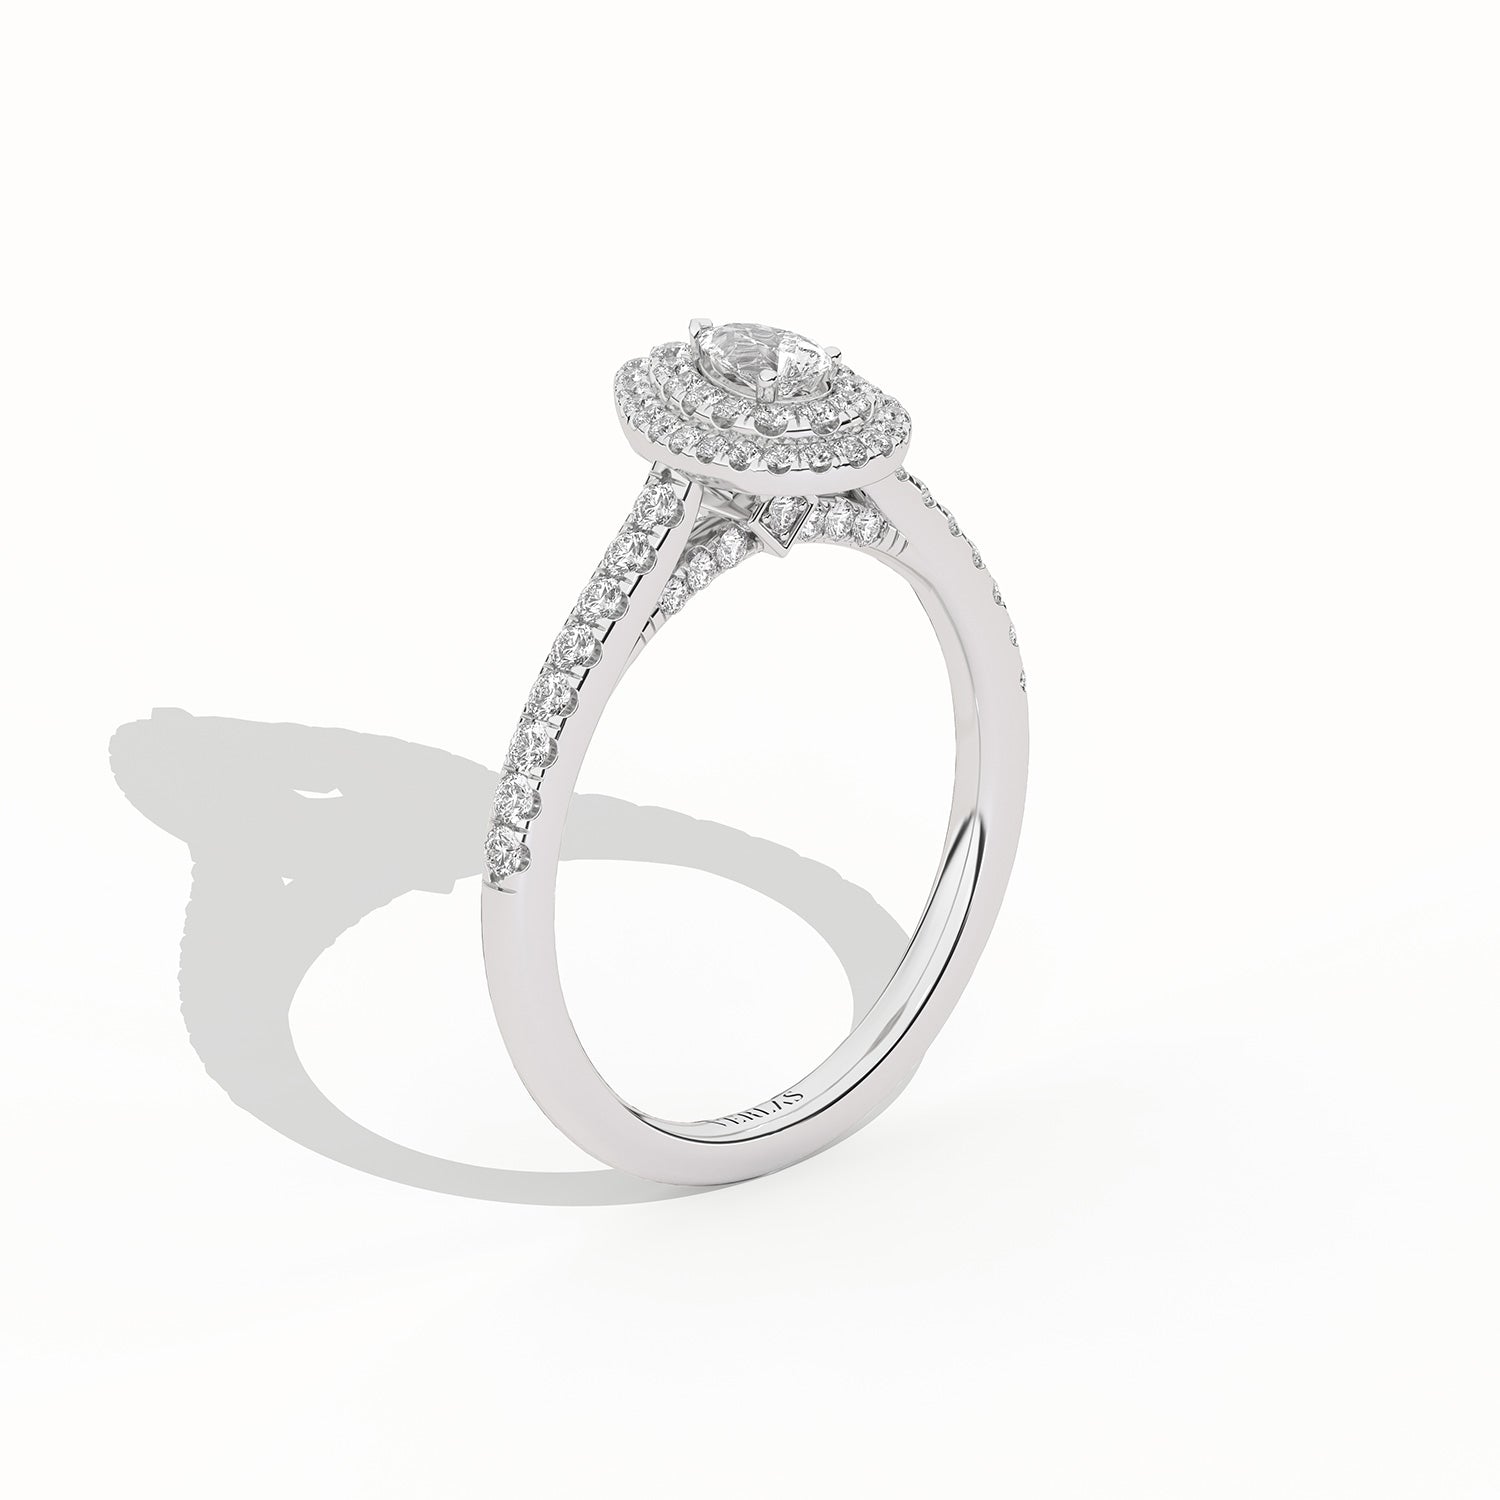 Signature Dewdrop Double halo Ring_Product Angle_1/2-2